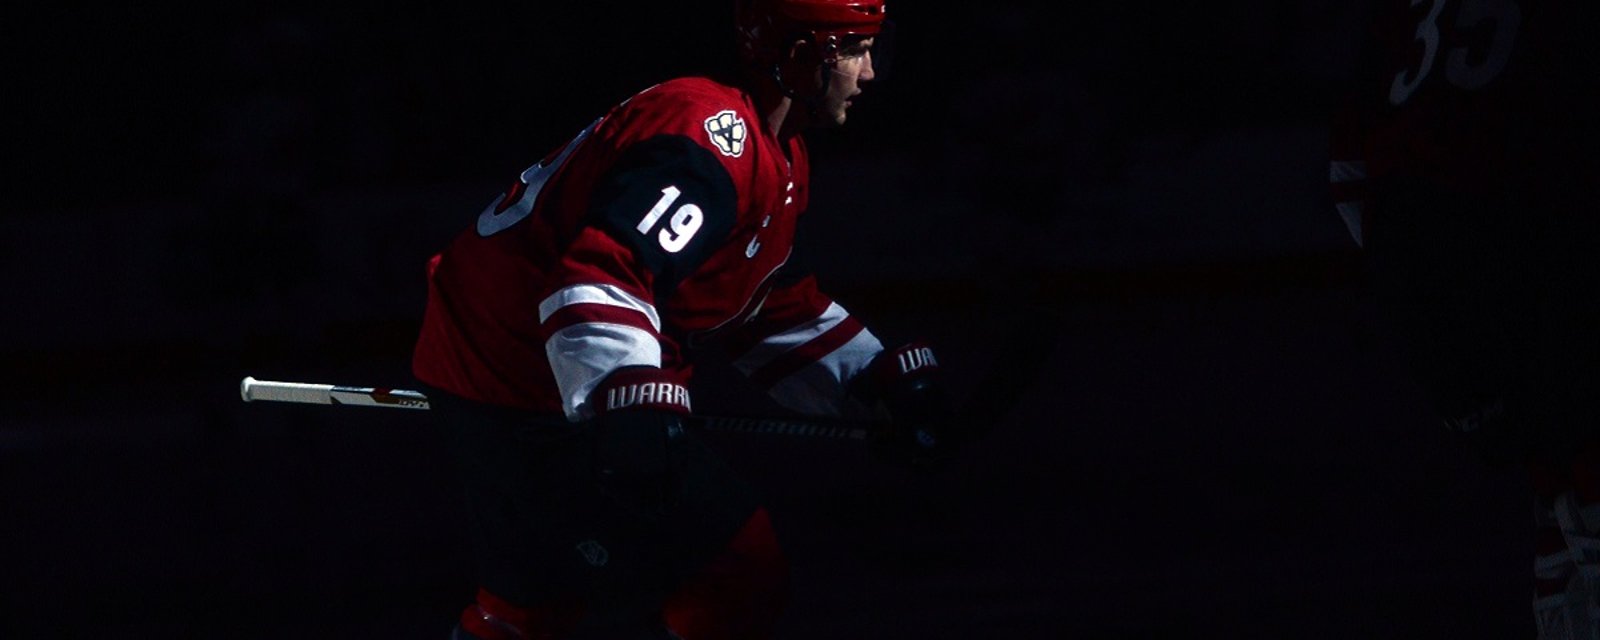 Coyotes captain Shane Doan reveals how he learned he was being cut by his team.